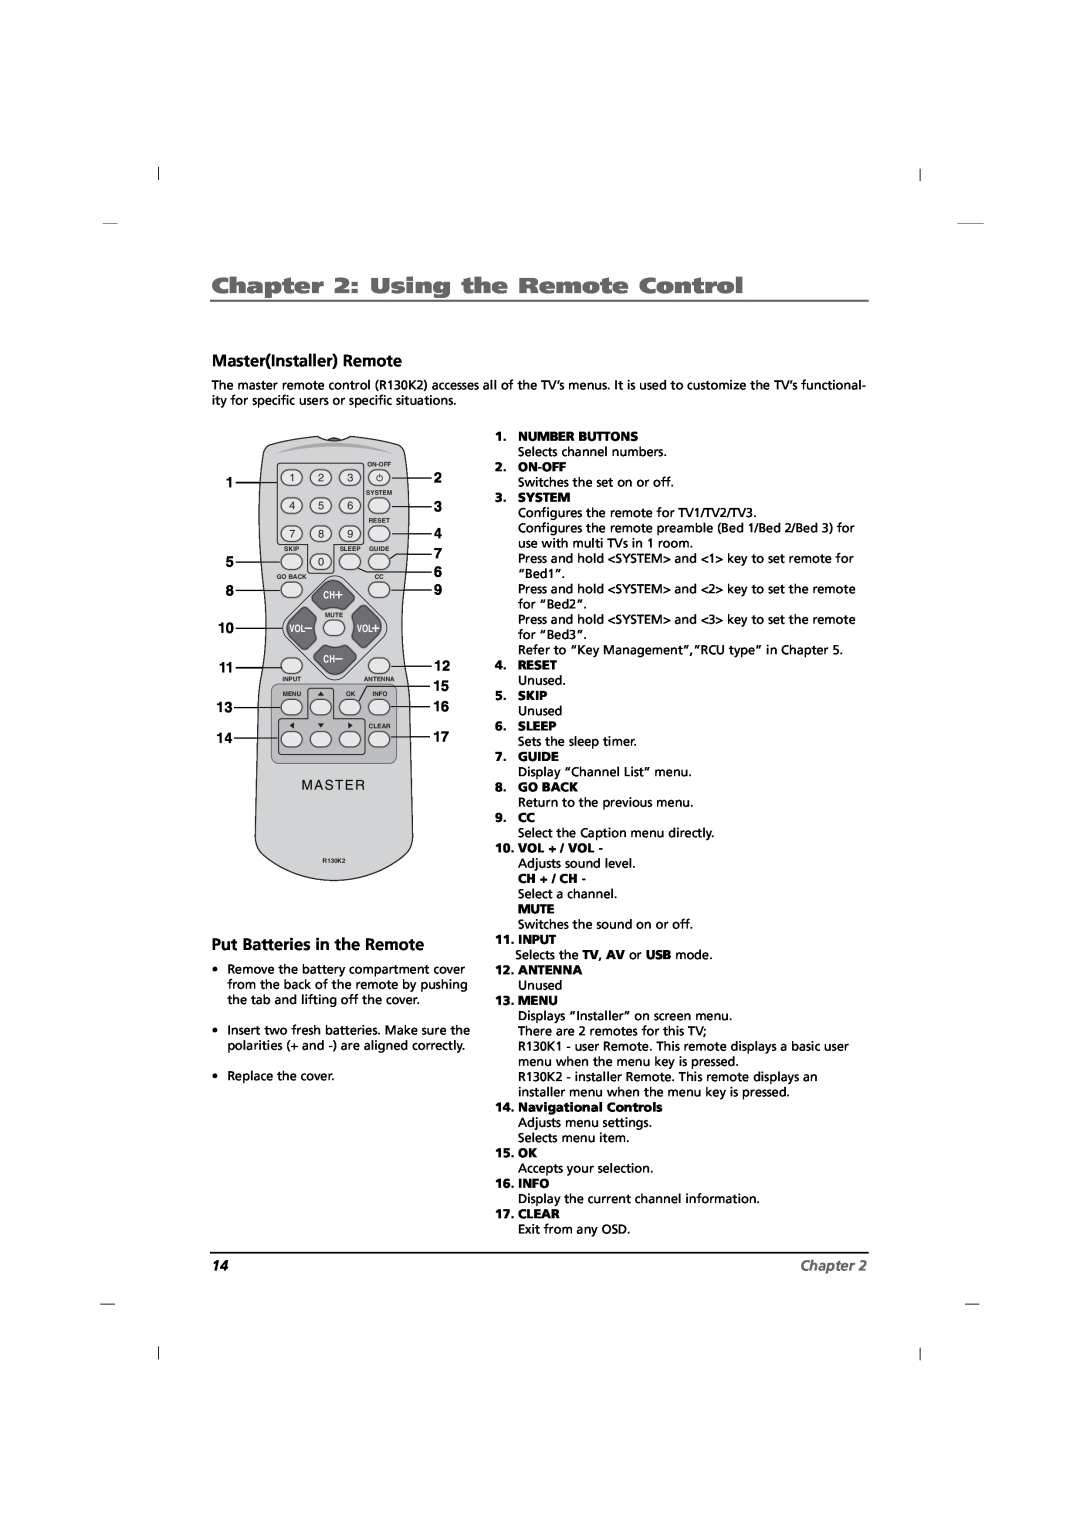 RCA J12H770 manual Using the Remote Control, MasterInstaller Remote, Put Batteries in the Remote, M A S T E R, Chapter 